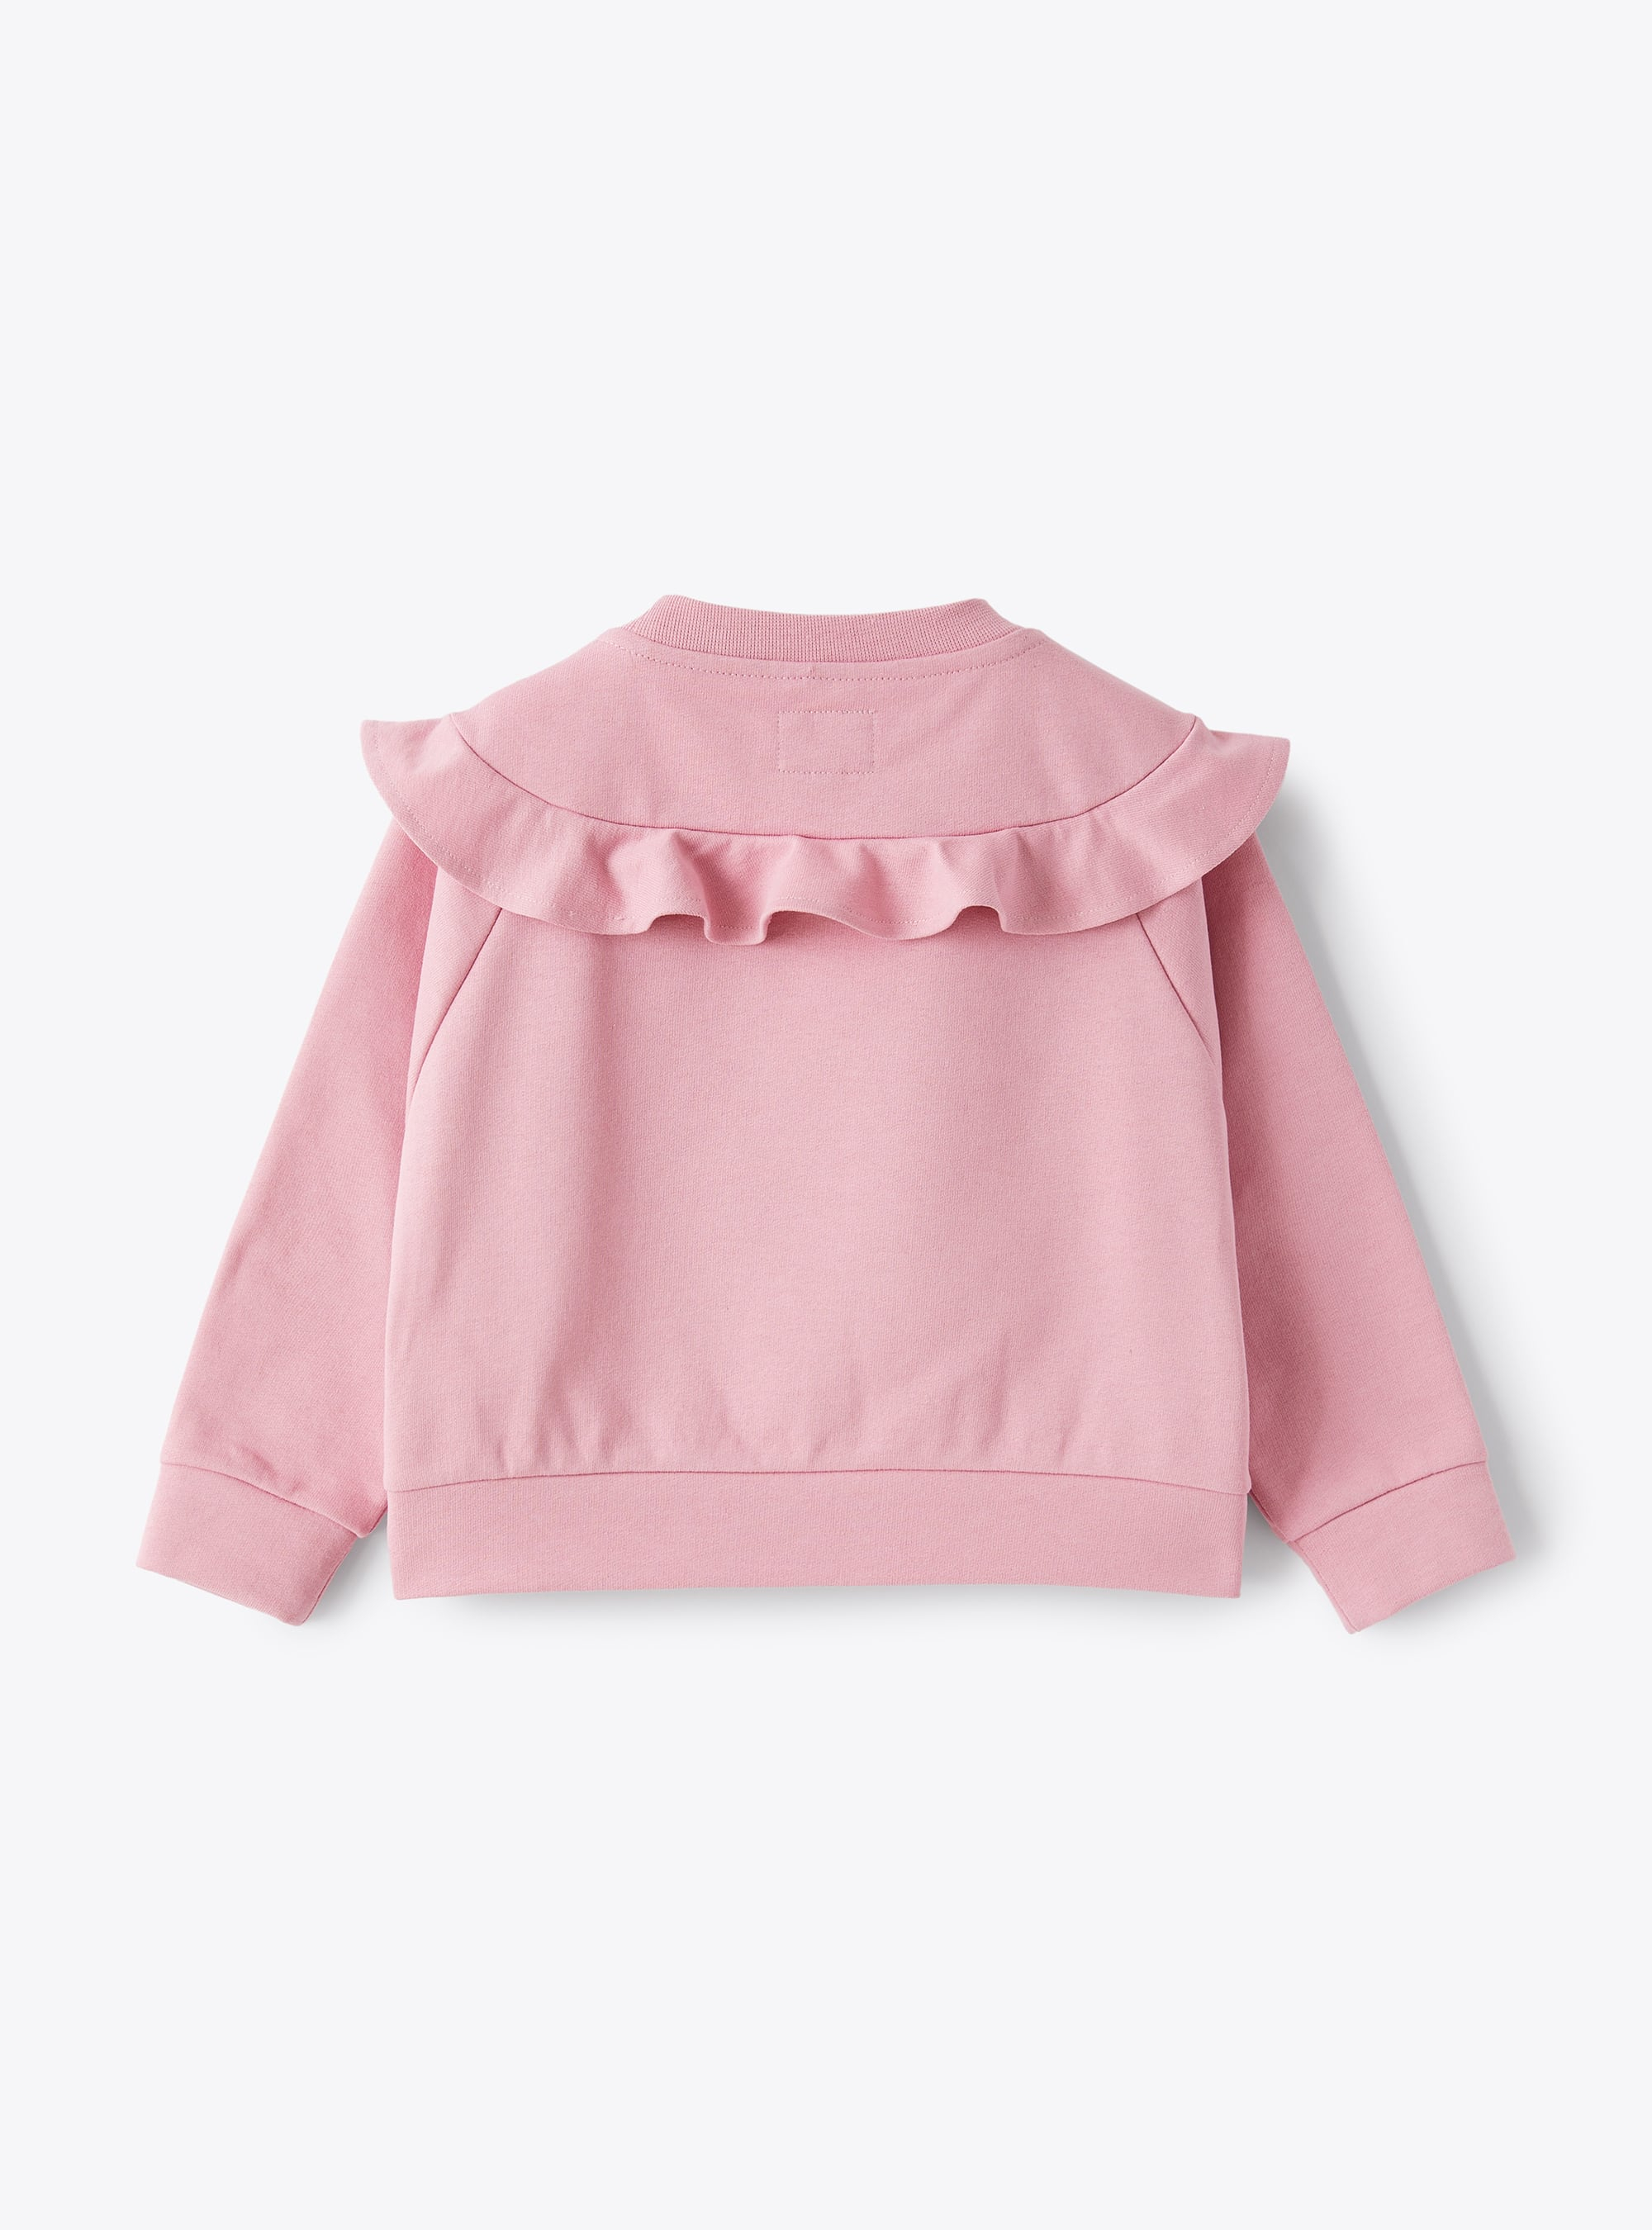 Sweatshirt in pink cotton with ruffle - Pink | Il Gufo